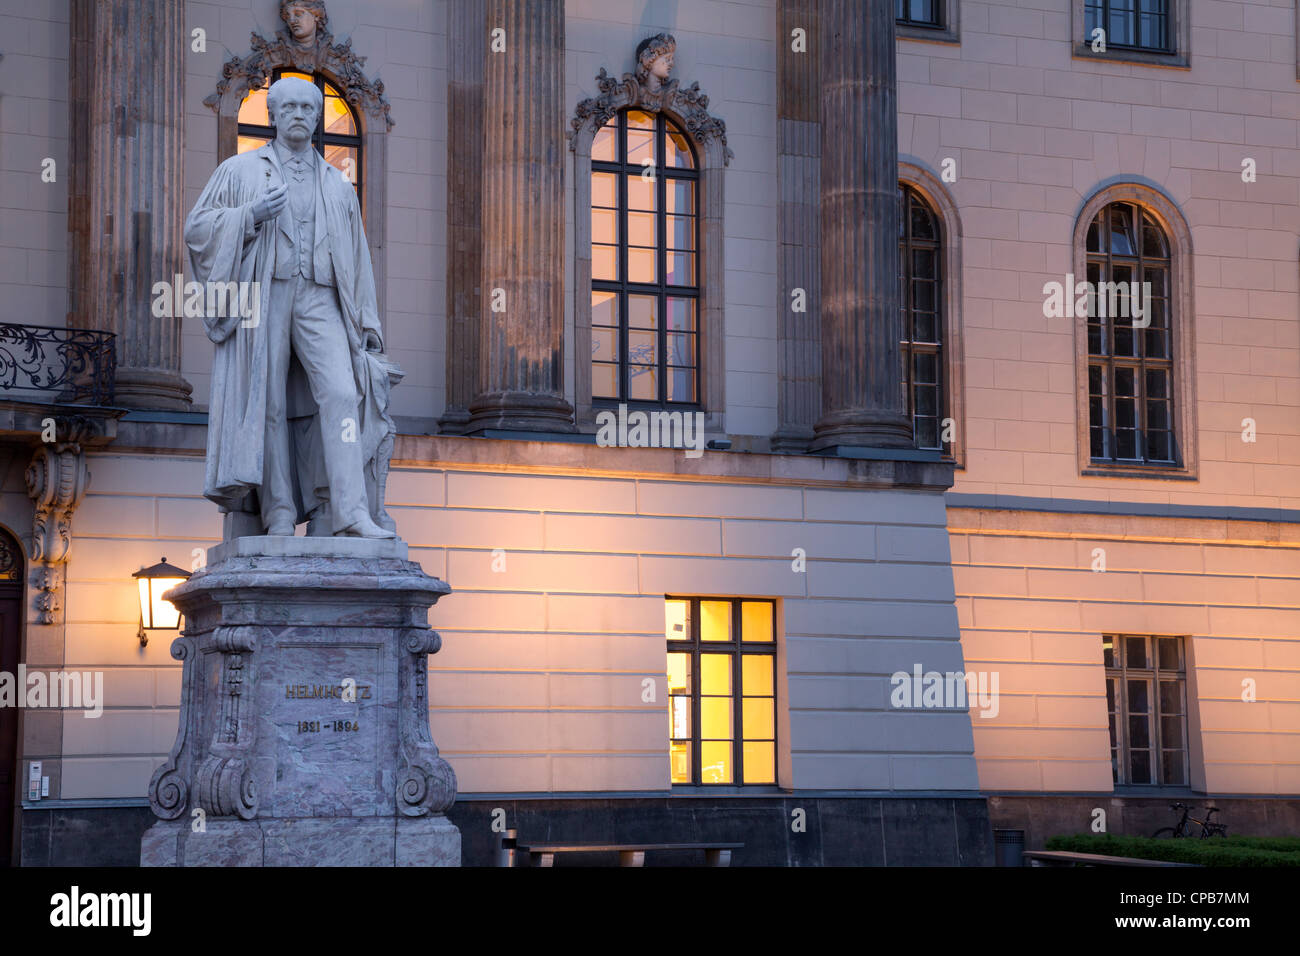 Humboldt University with statue of Helmholtz, Berlin, Germany Stock Photo